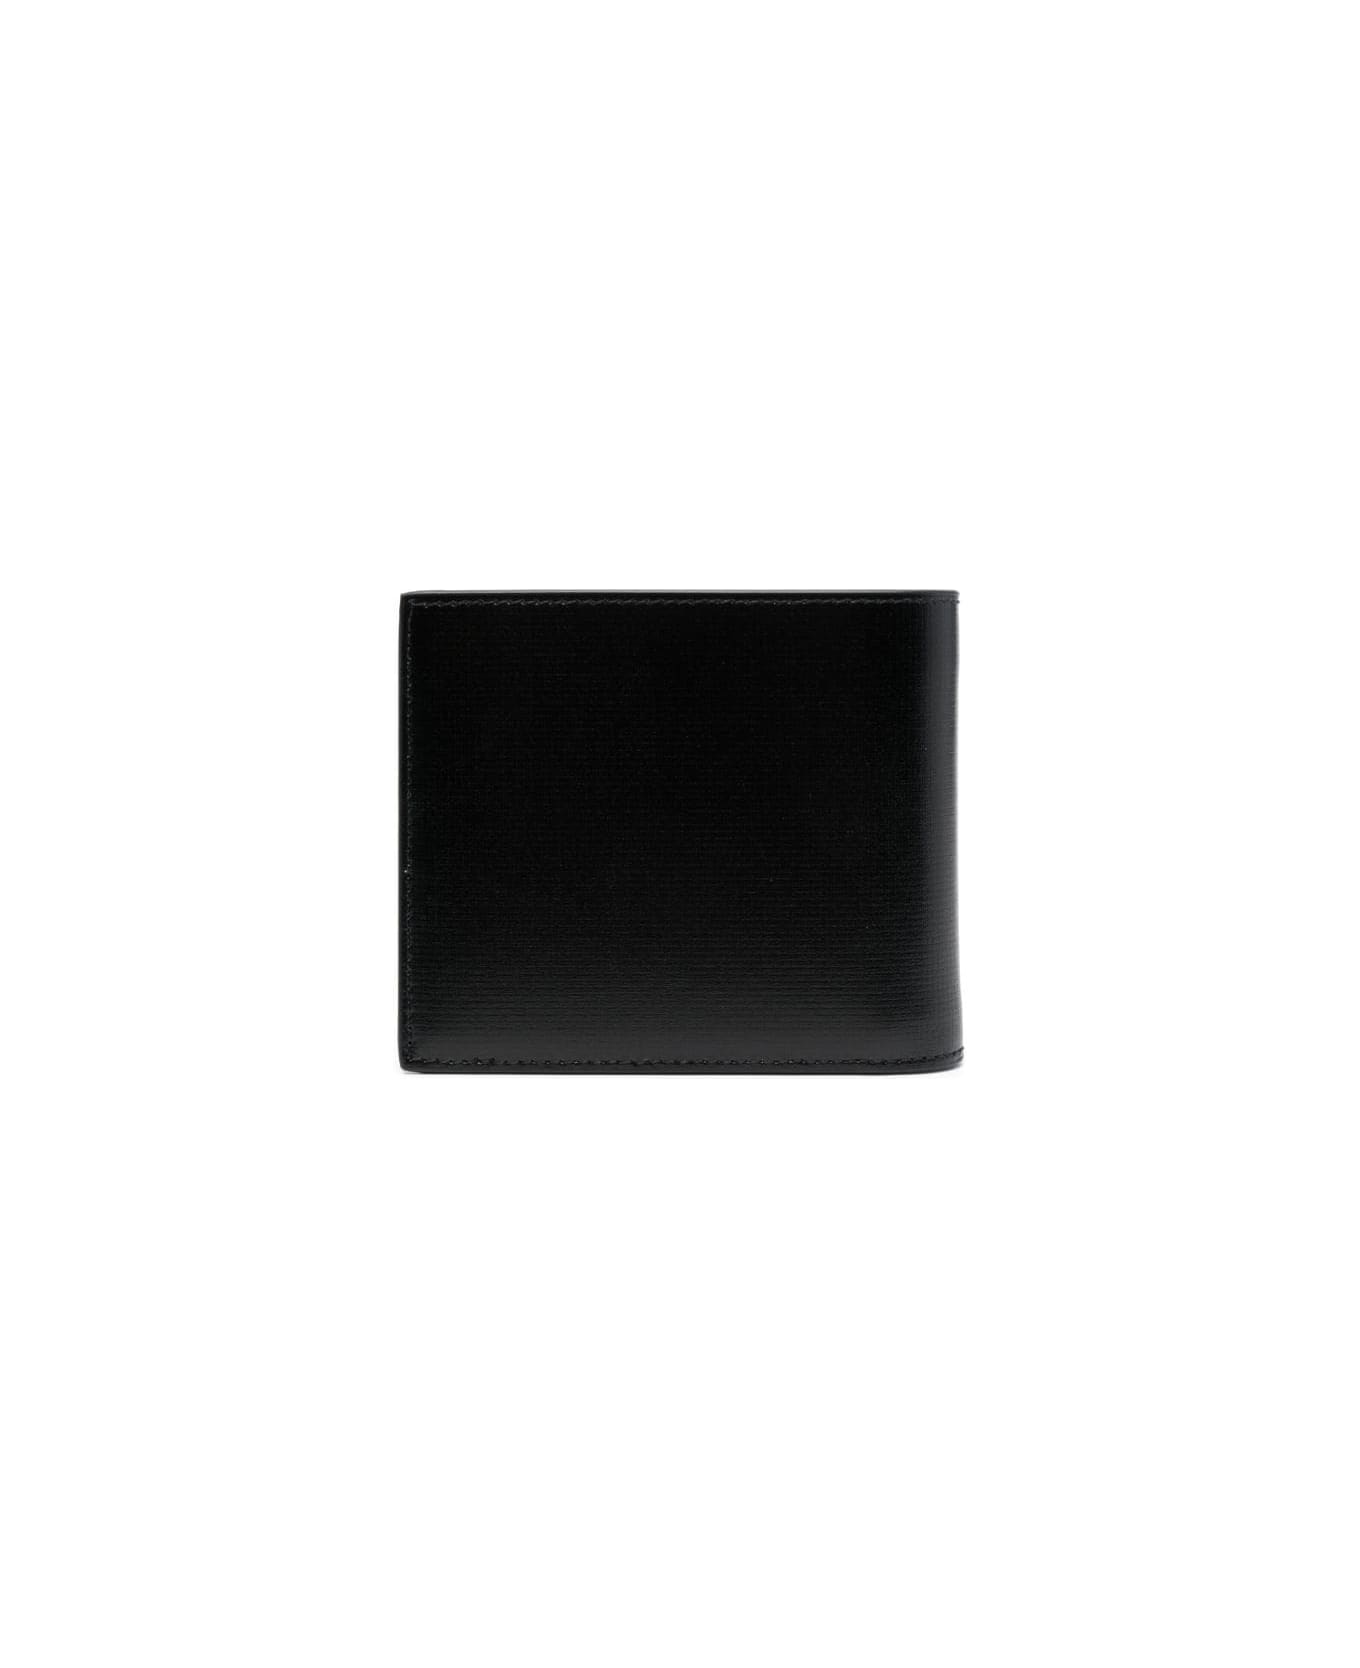 Givenchy Wallet In Black Classique 4g Leather - Black